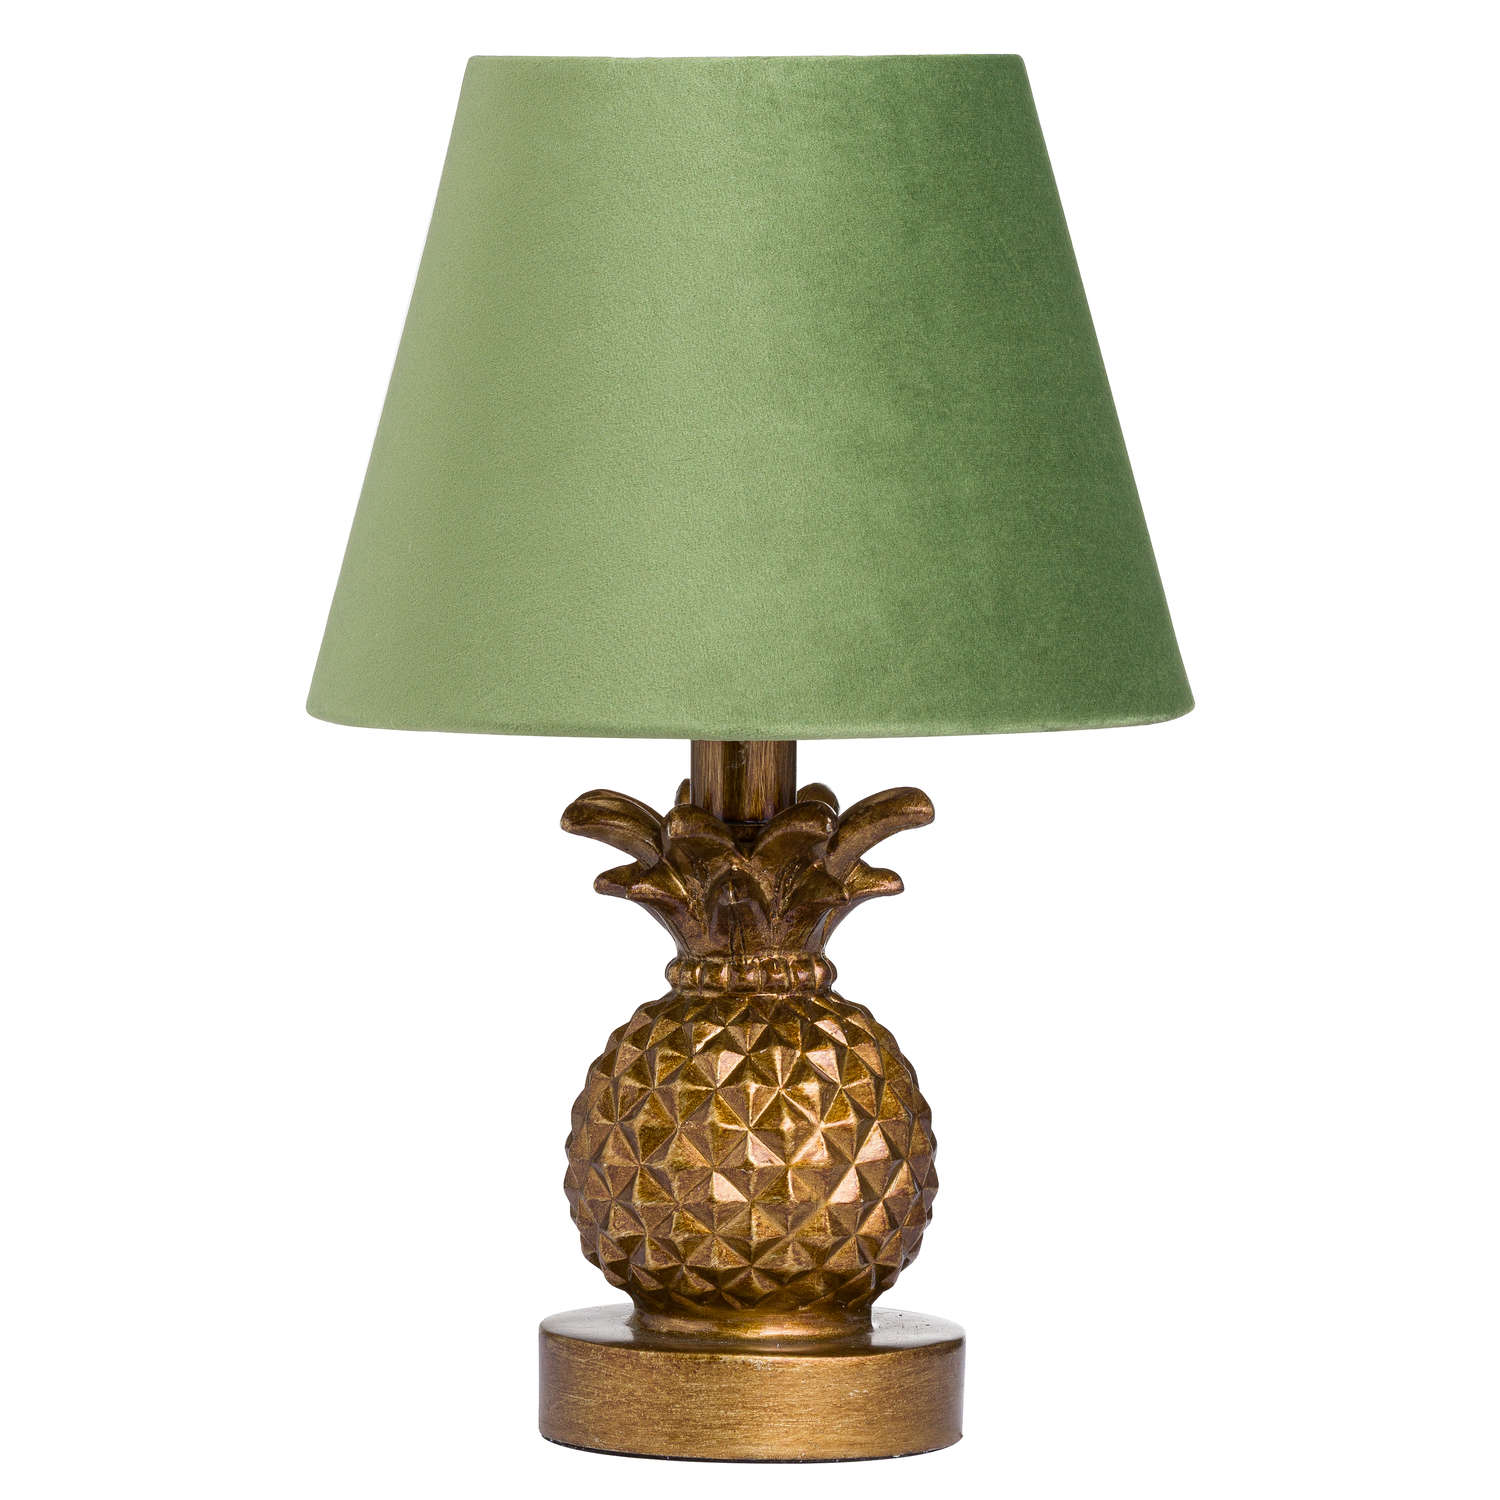 Antique Gold Pineapple Lamp With Artichoke Green VelvetShade